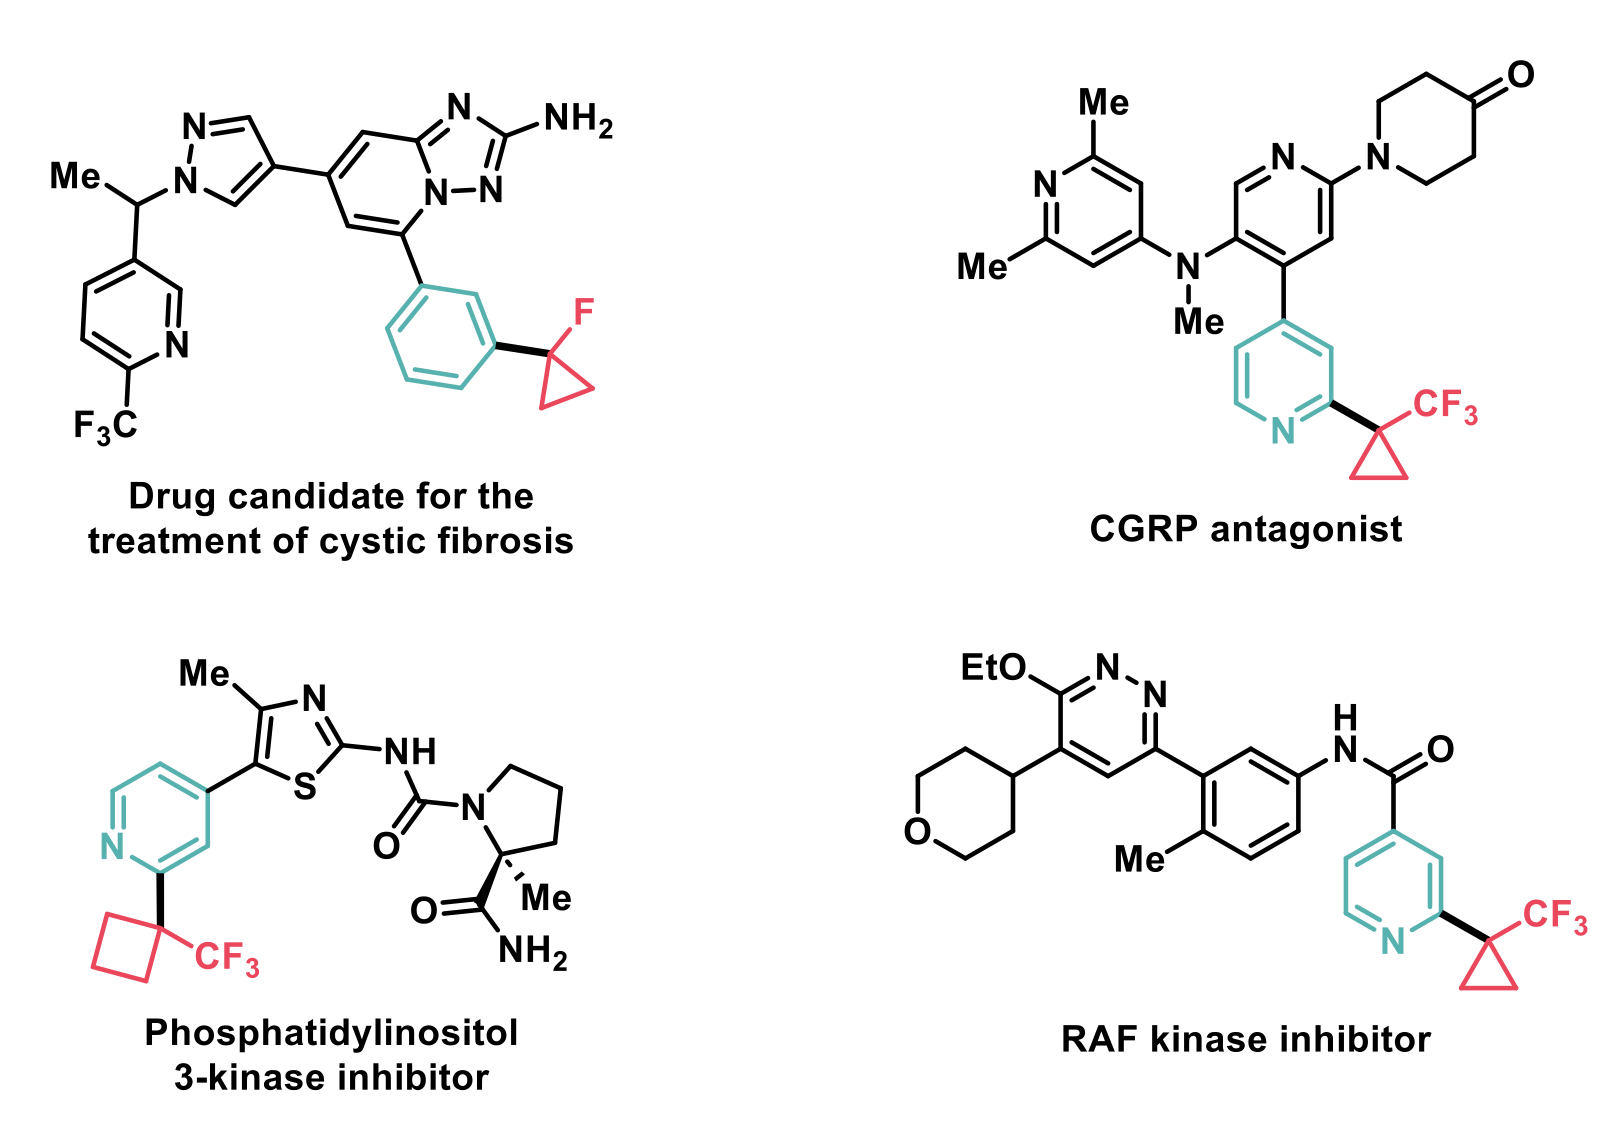 Methodology applied to real-life medicinal chemistry intermediates